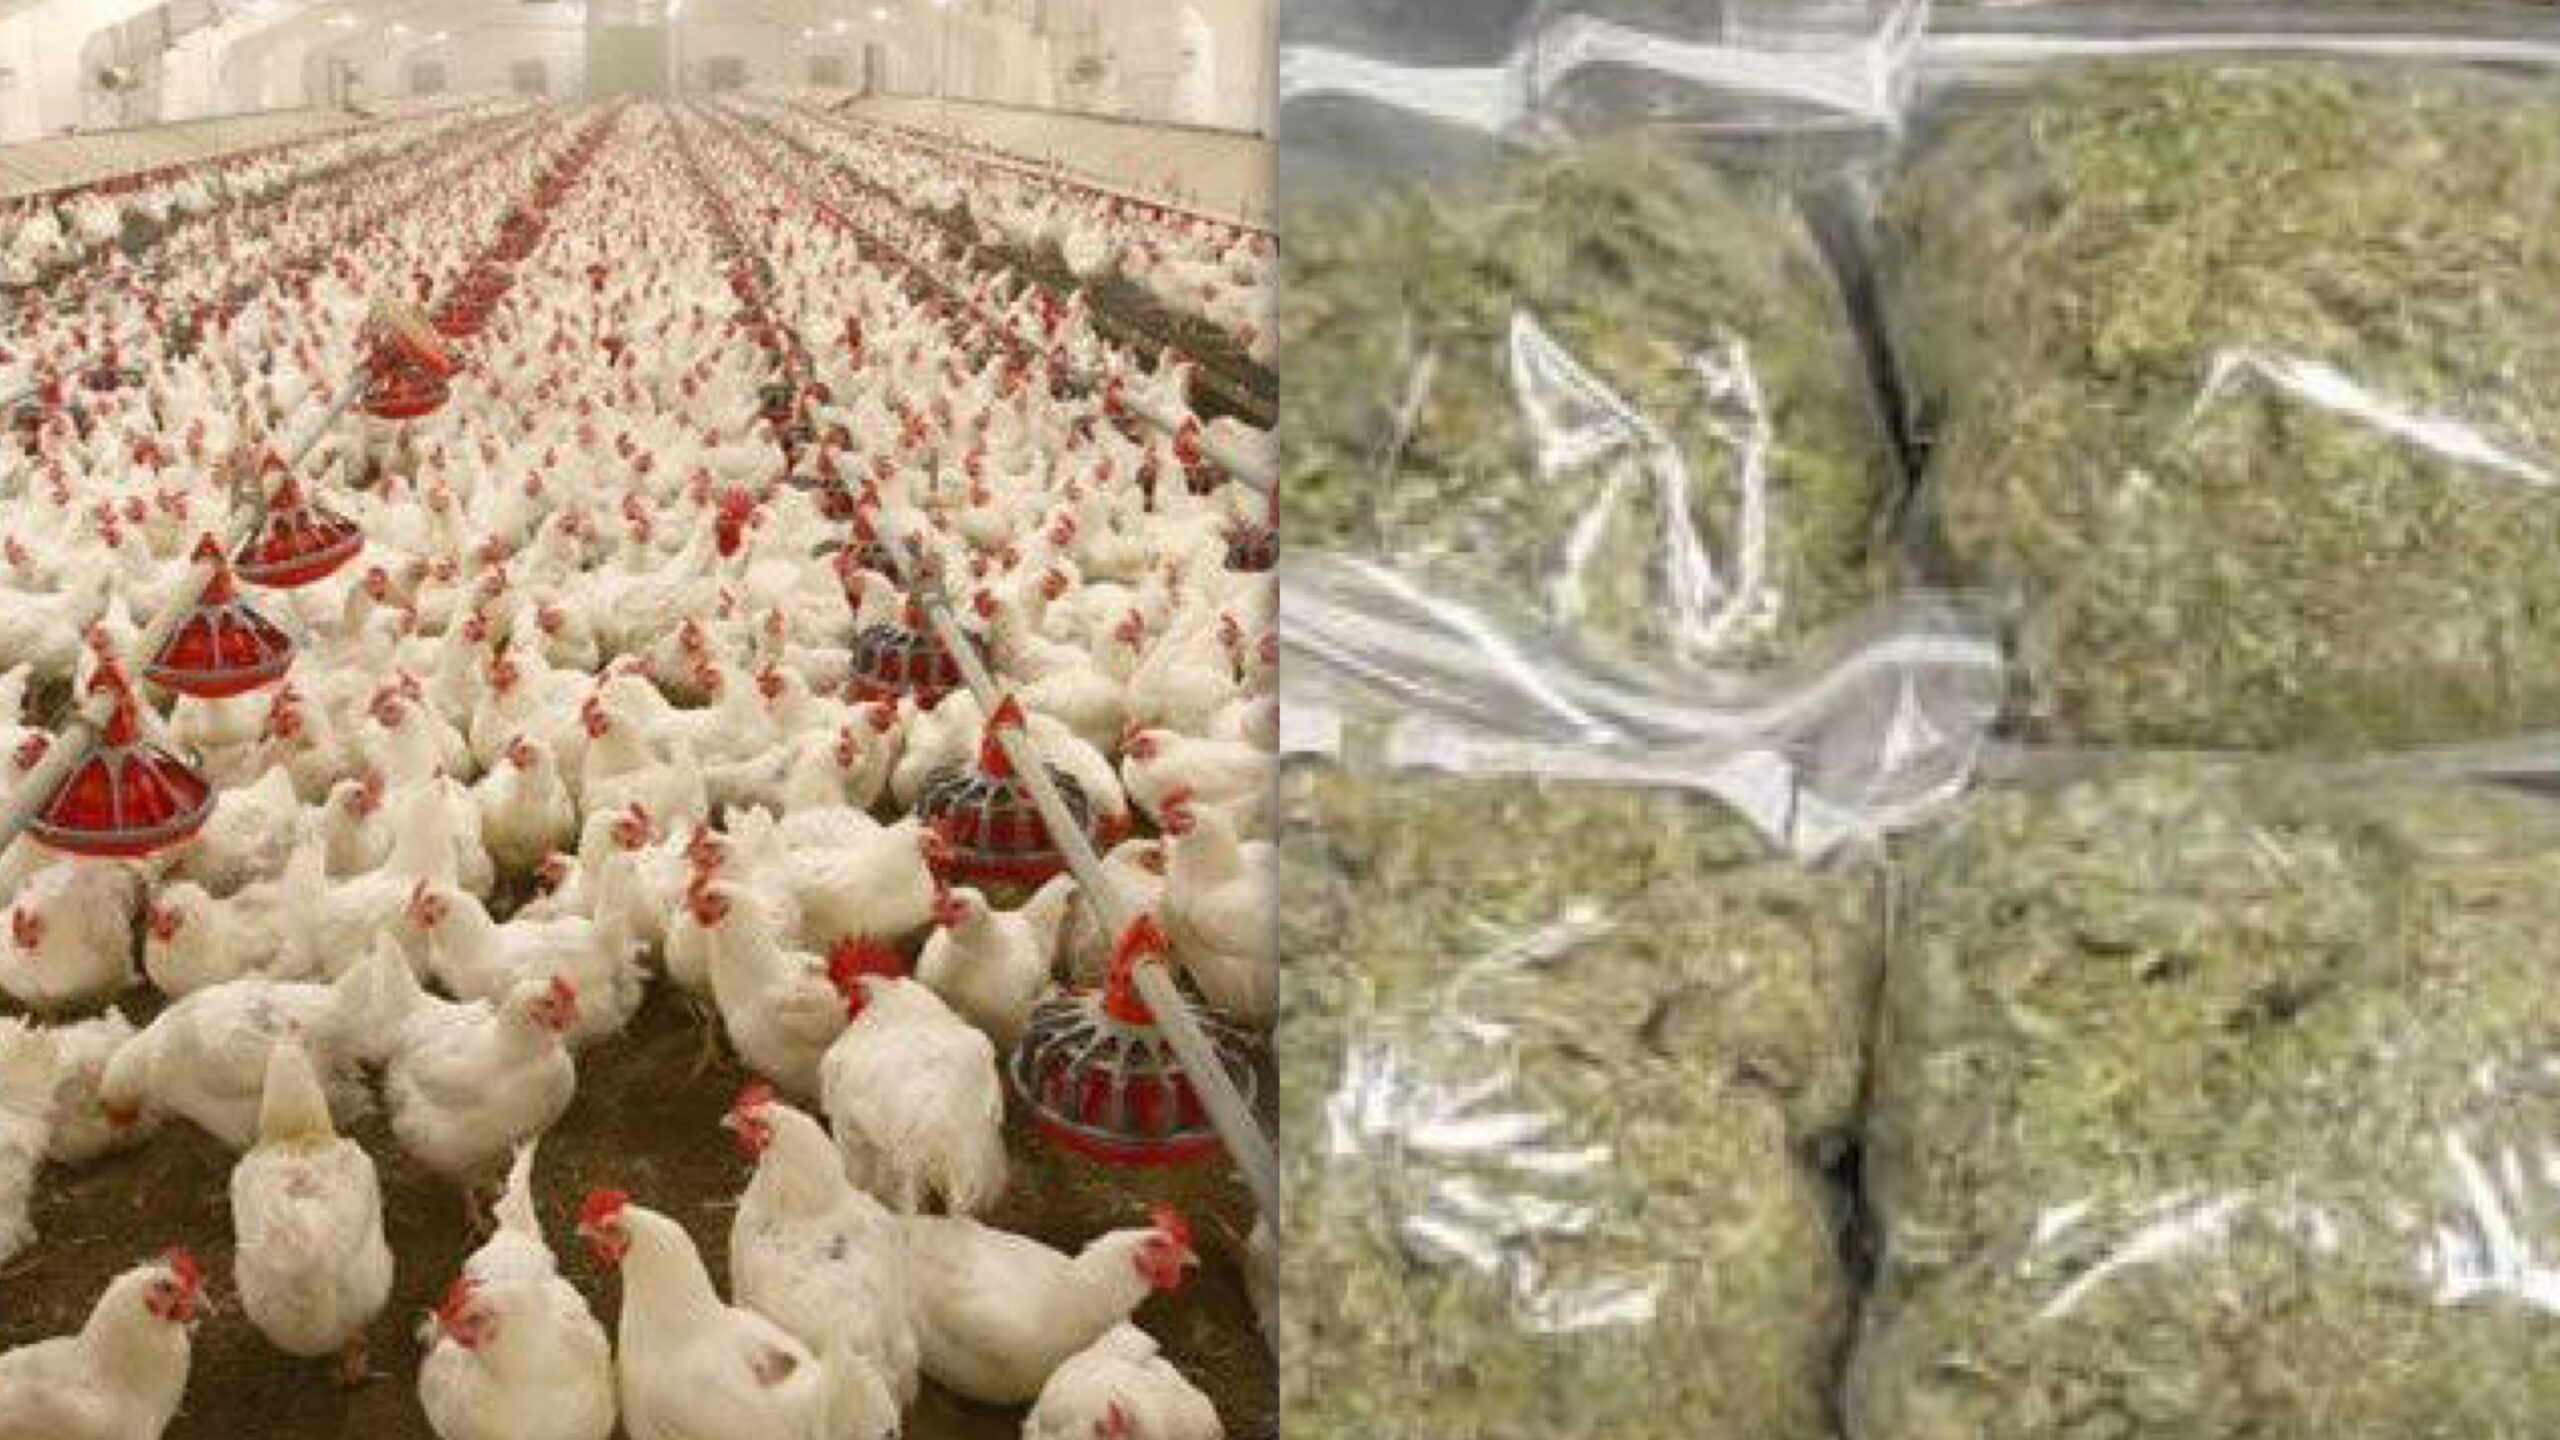 poultry farm and weed